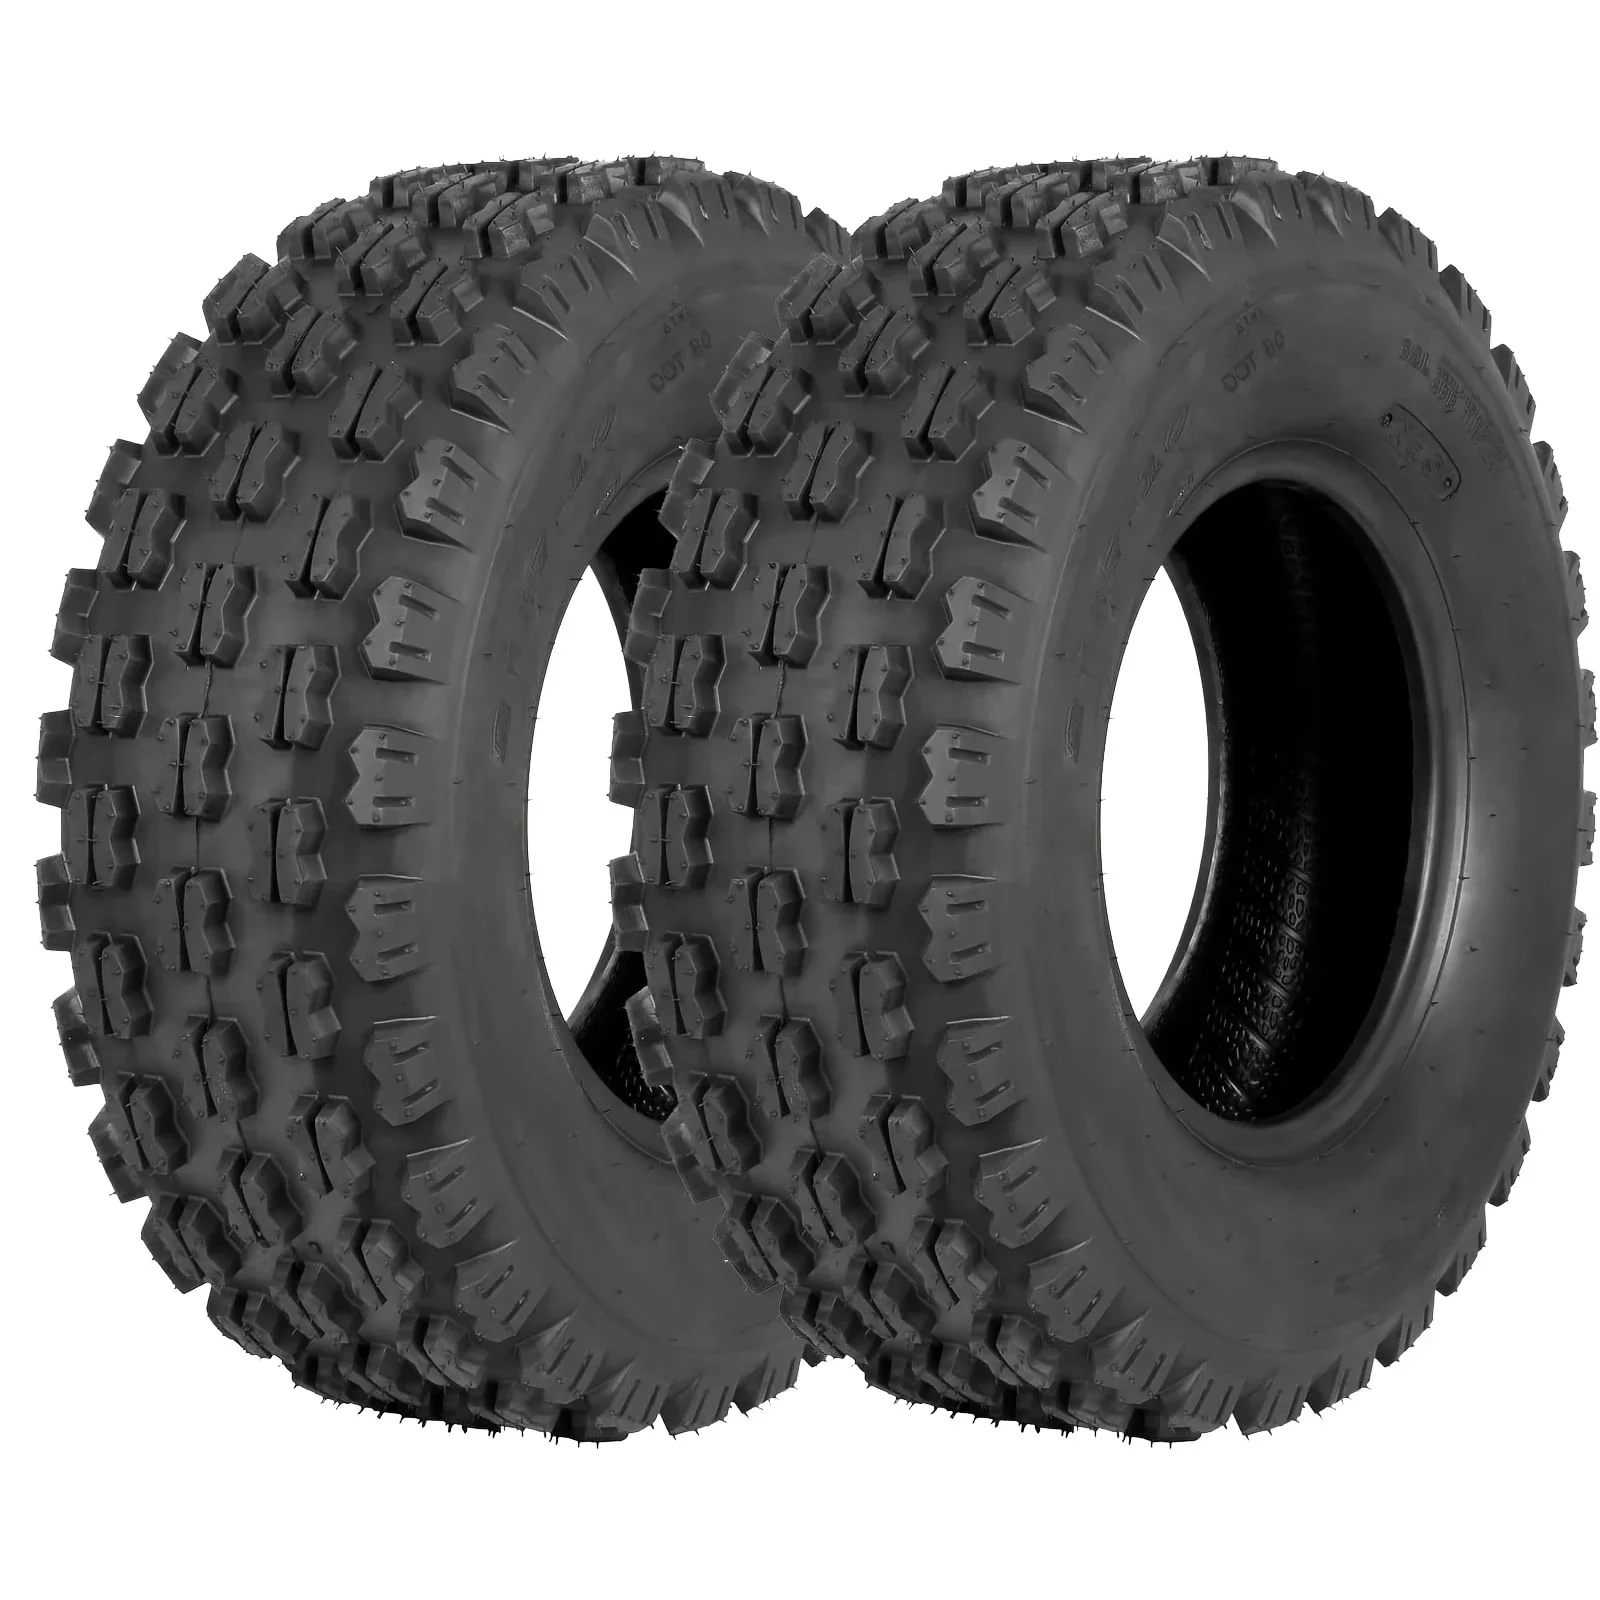 

High Quality 22x7-10 22x7x10 4 Ply ATV Tires for Quad UTV Off-Road Use - Set of 2 Pieces - All Terrain Design for Ultimate Perfo